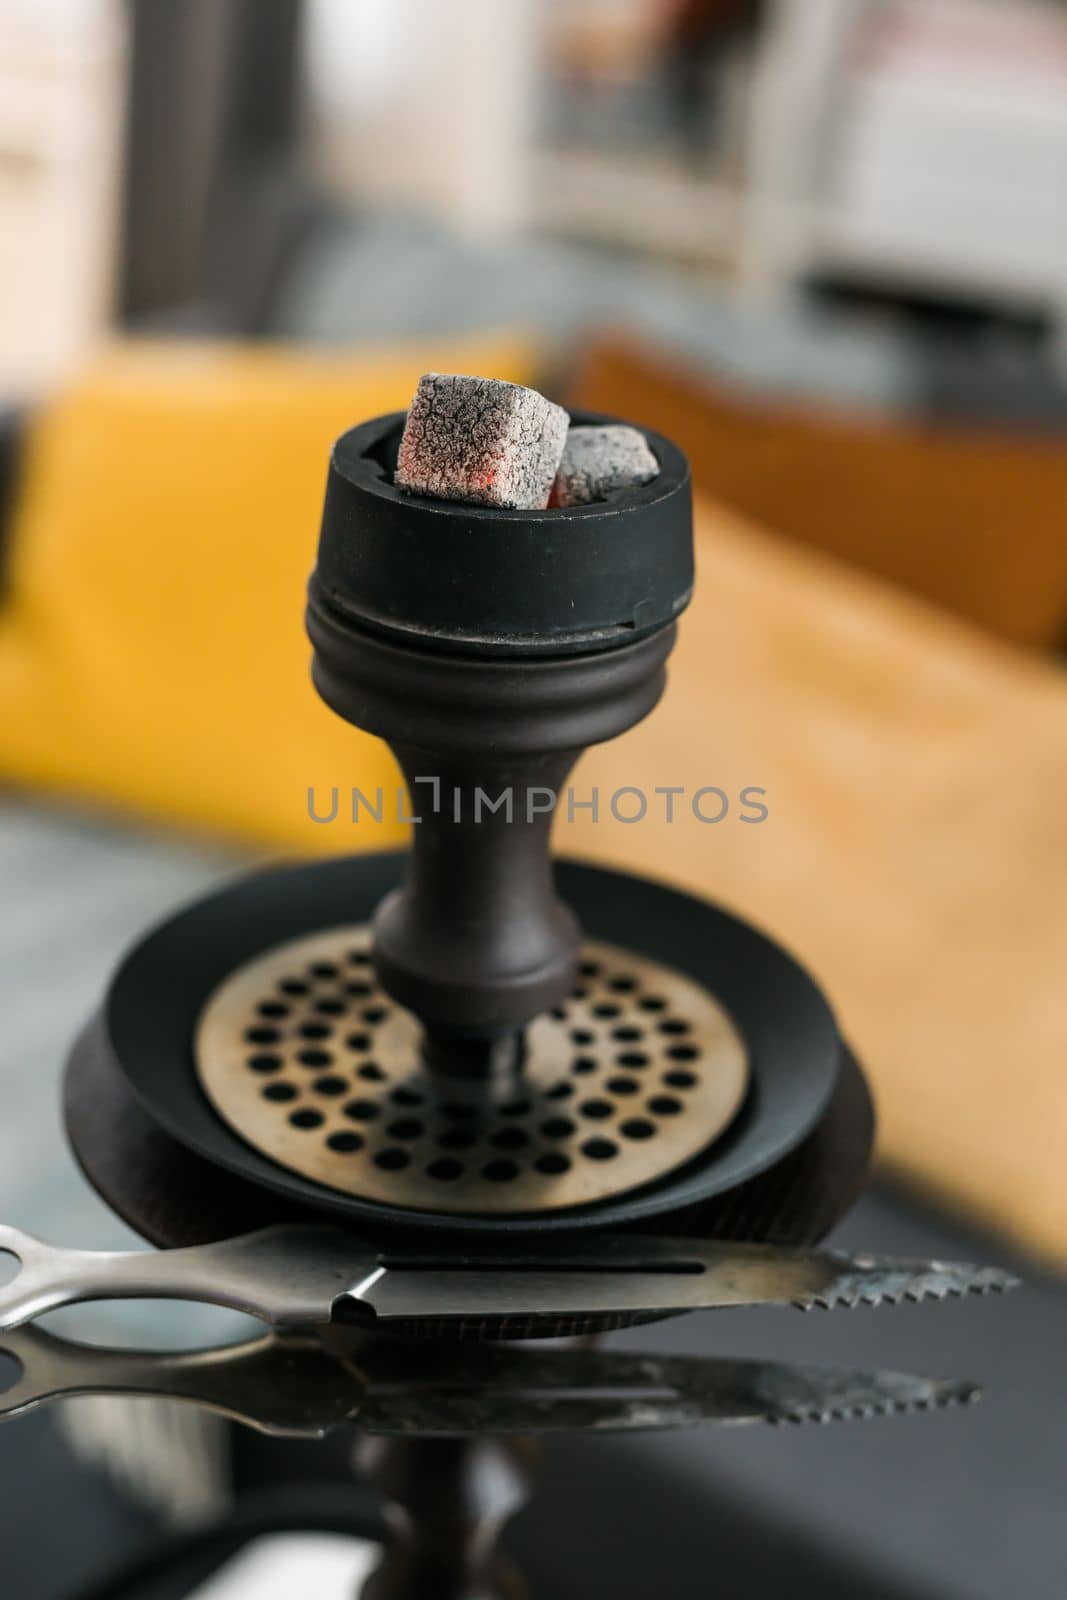 Hookah hot coals for smoking close-up leisure in natural lighting in room